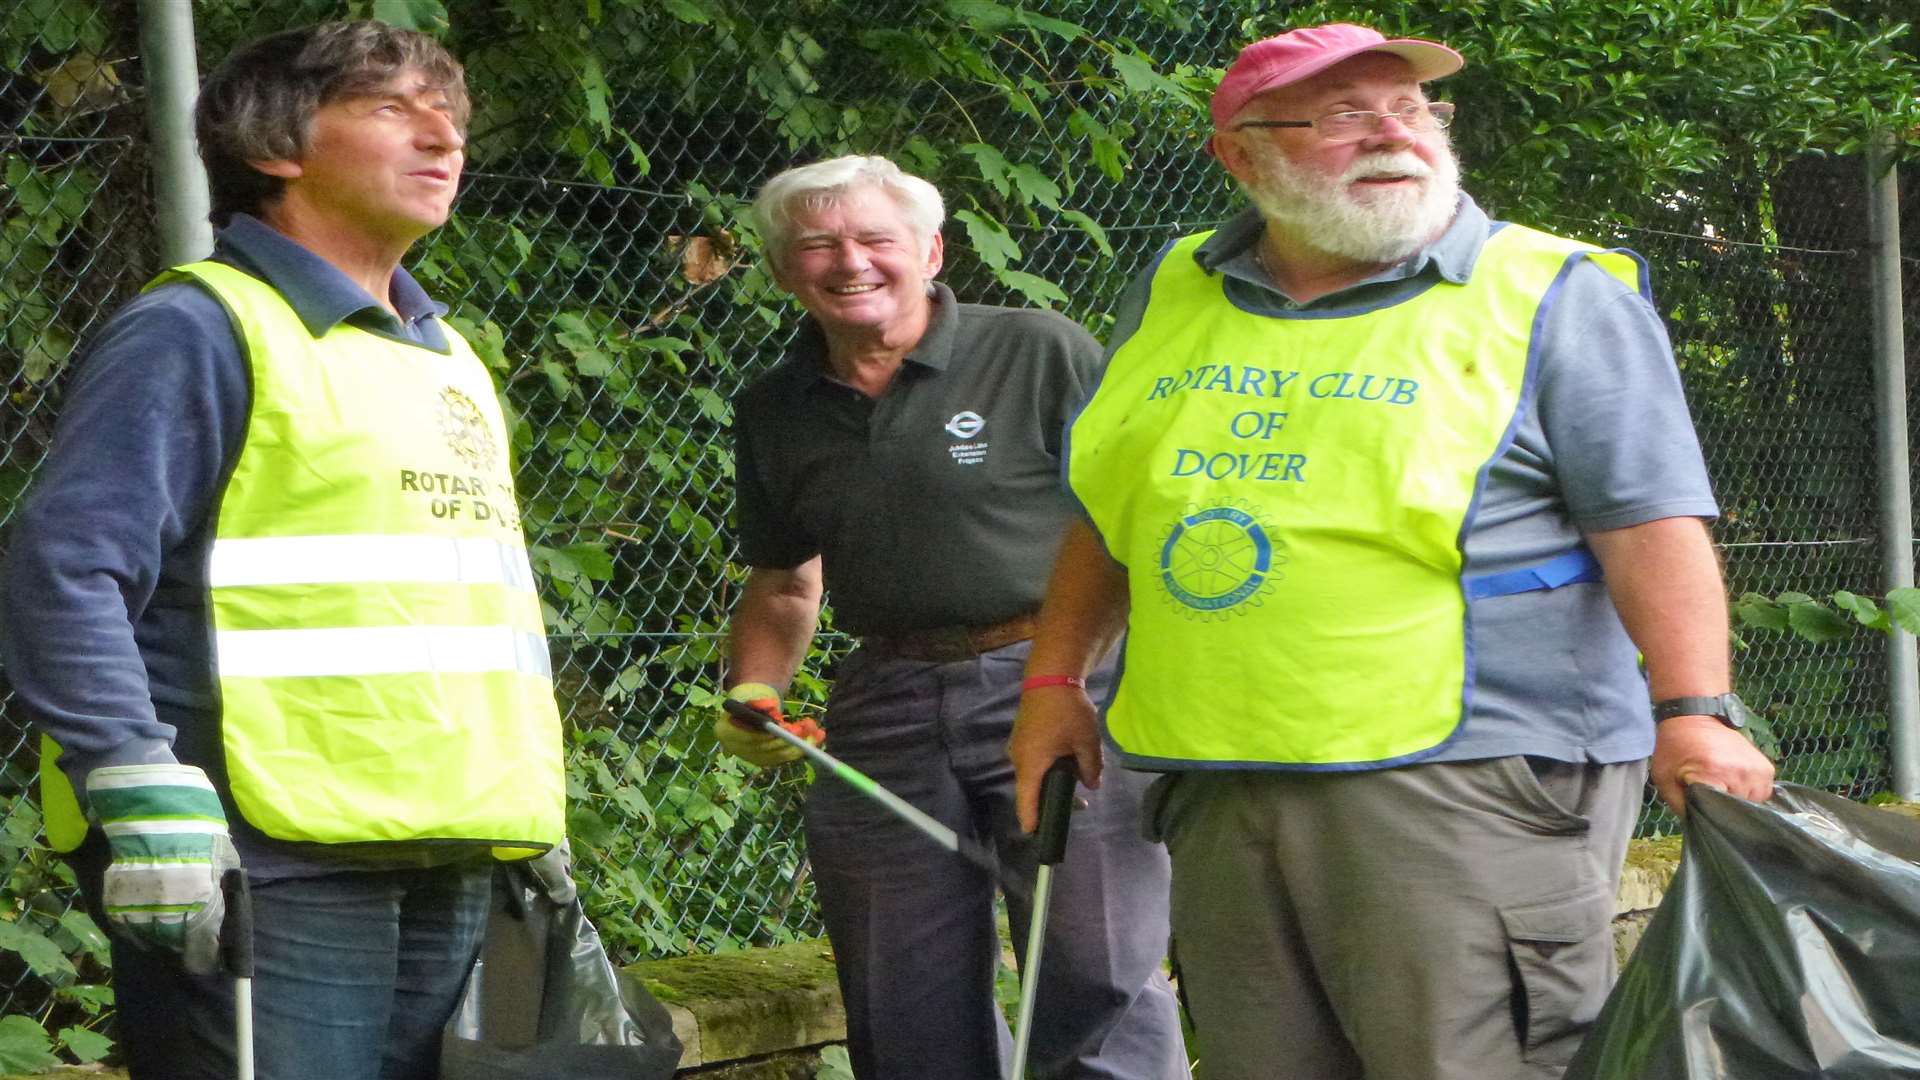 Rotary Club of Dover have to clean up of St Mary's Primary School area, just two months after the last cleaning. Pictured are John Morgan, John Widgery and Dave Smith.